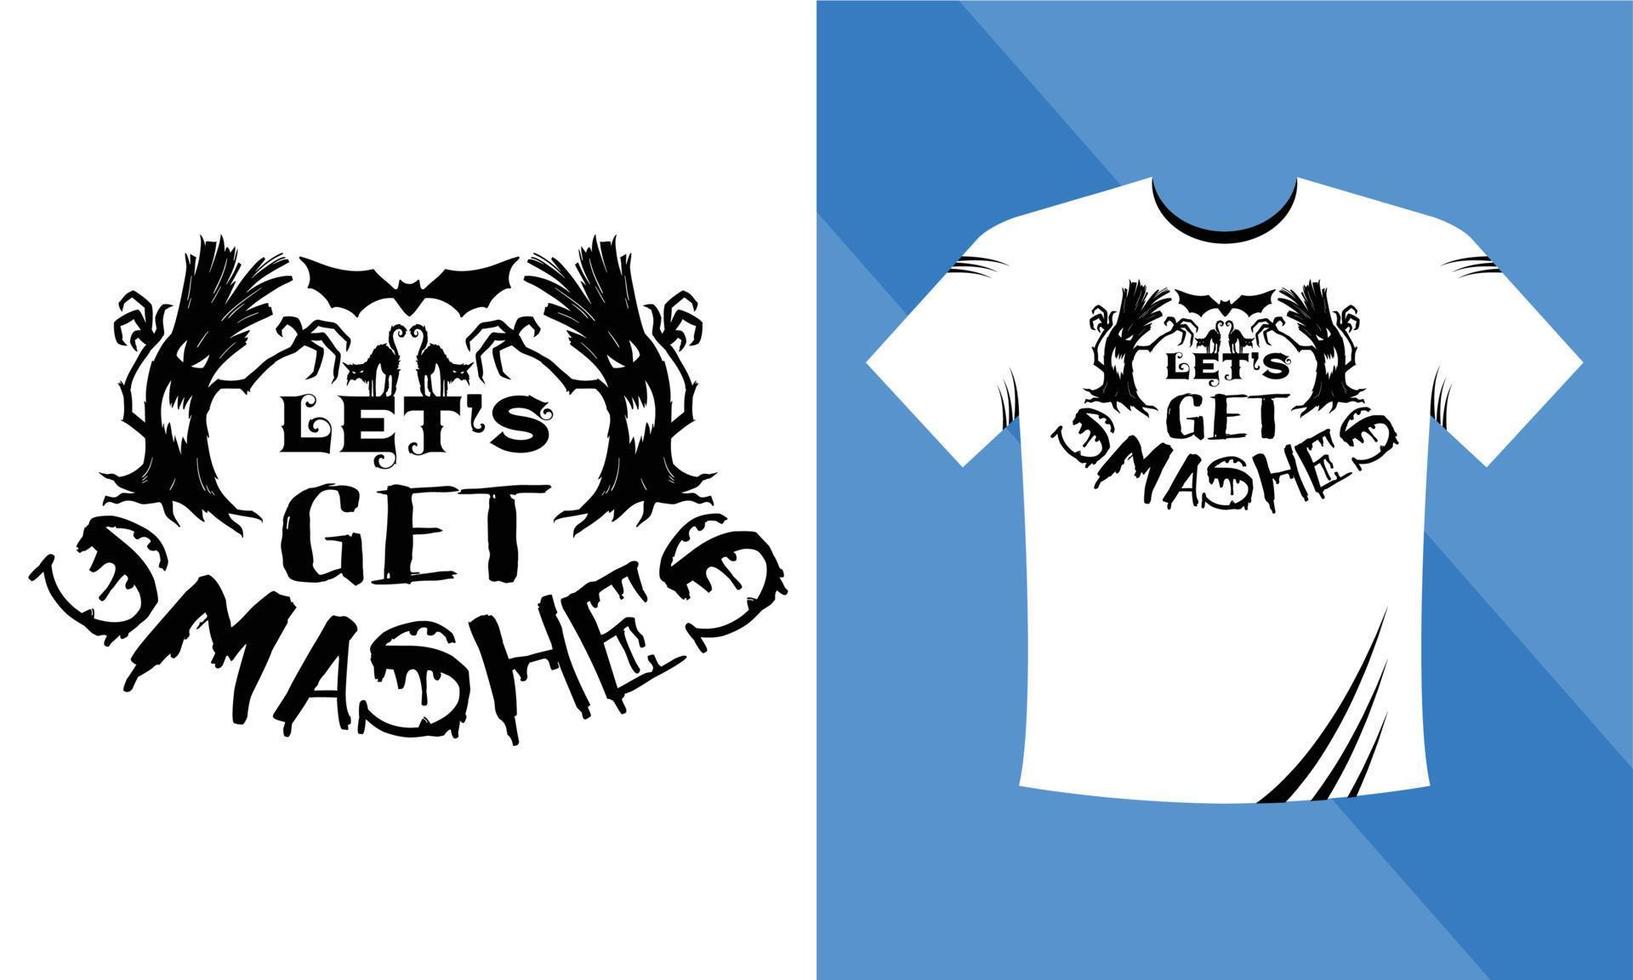 Let's get smashes - Halloween T-Shirt design template. Happy Halloween t-shirt design template easy to print all-purpose for men, women, and children vector